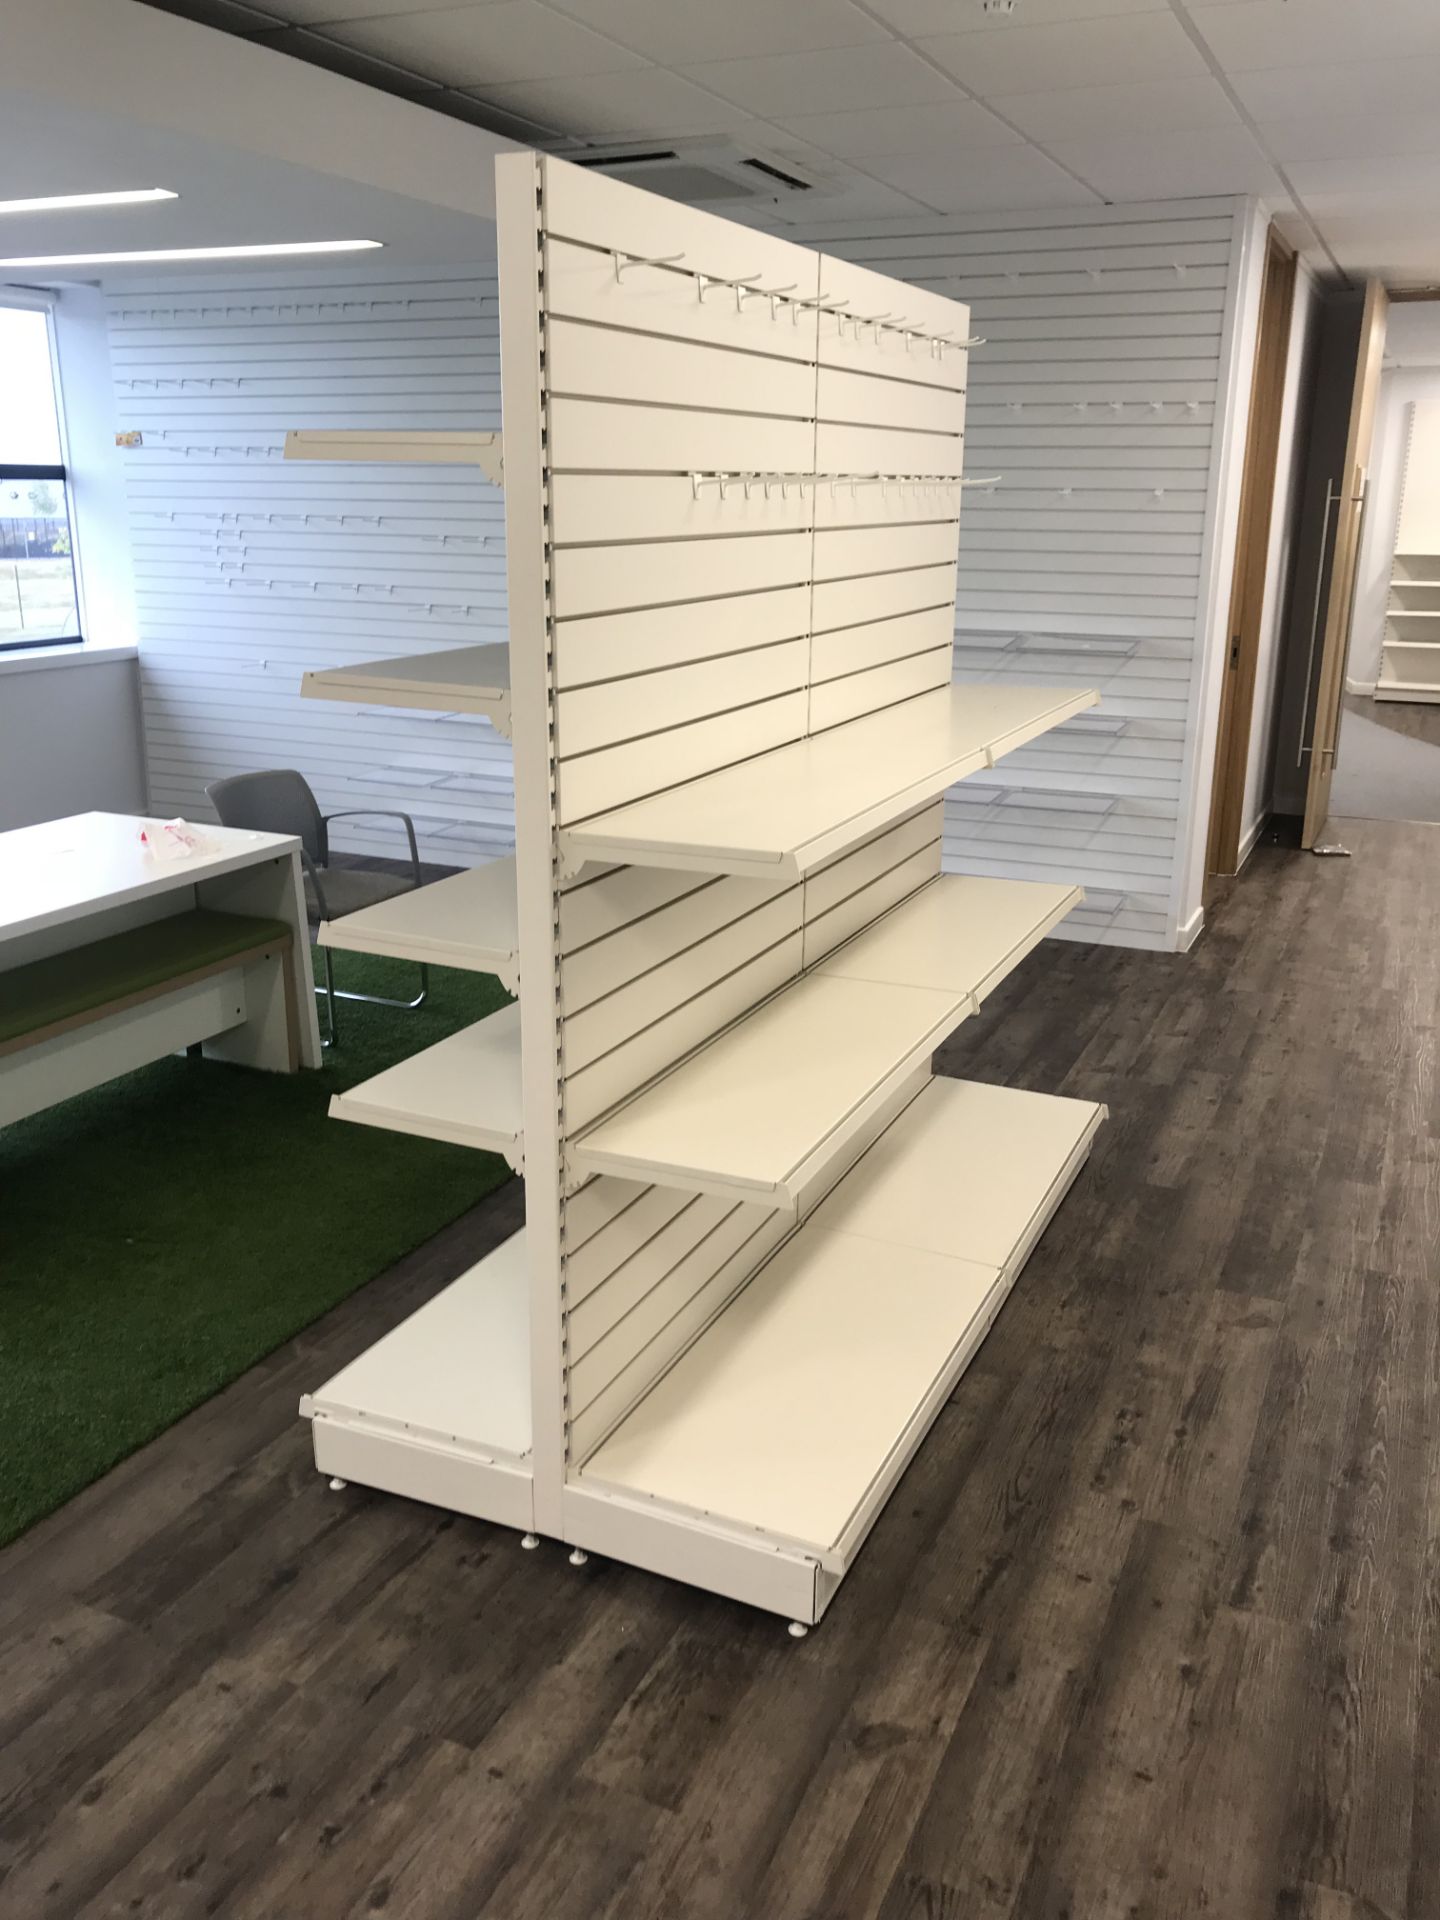 7 x Bays of Cantilever Shelving